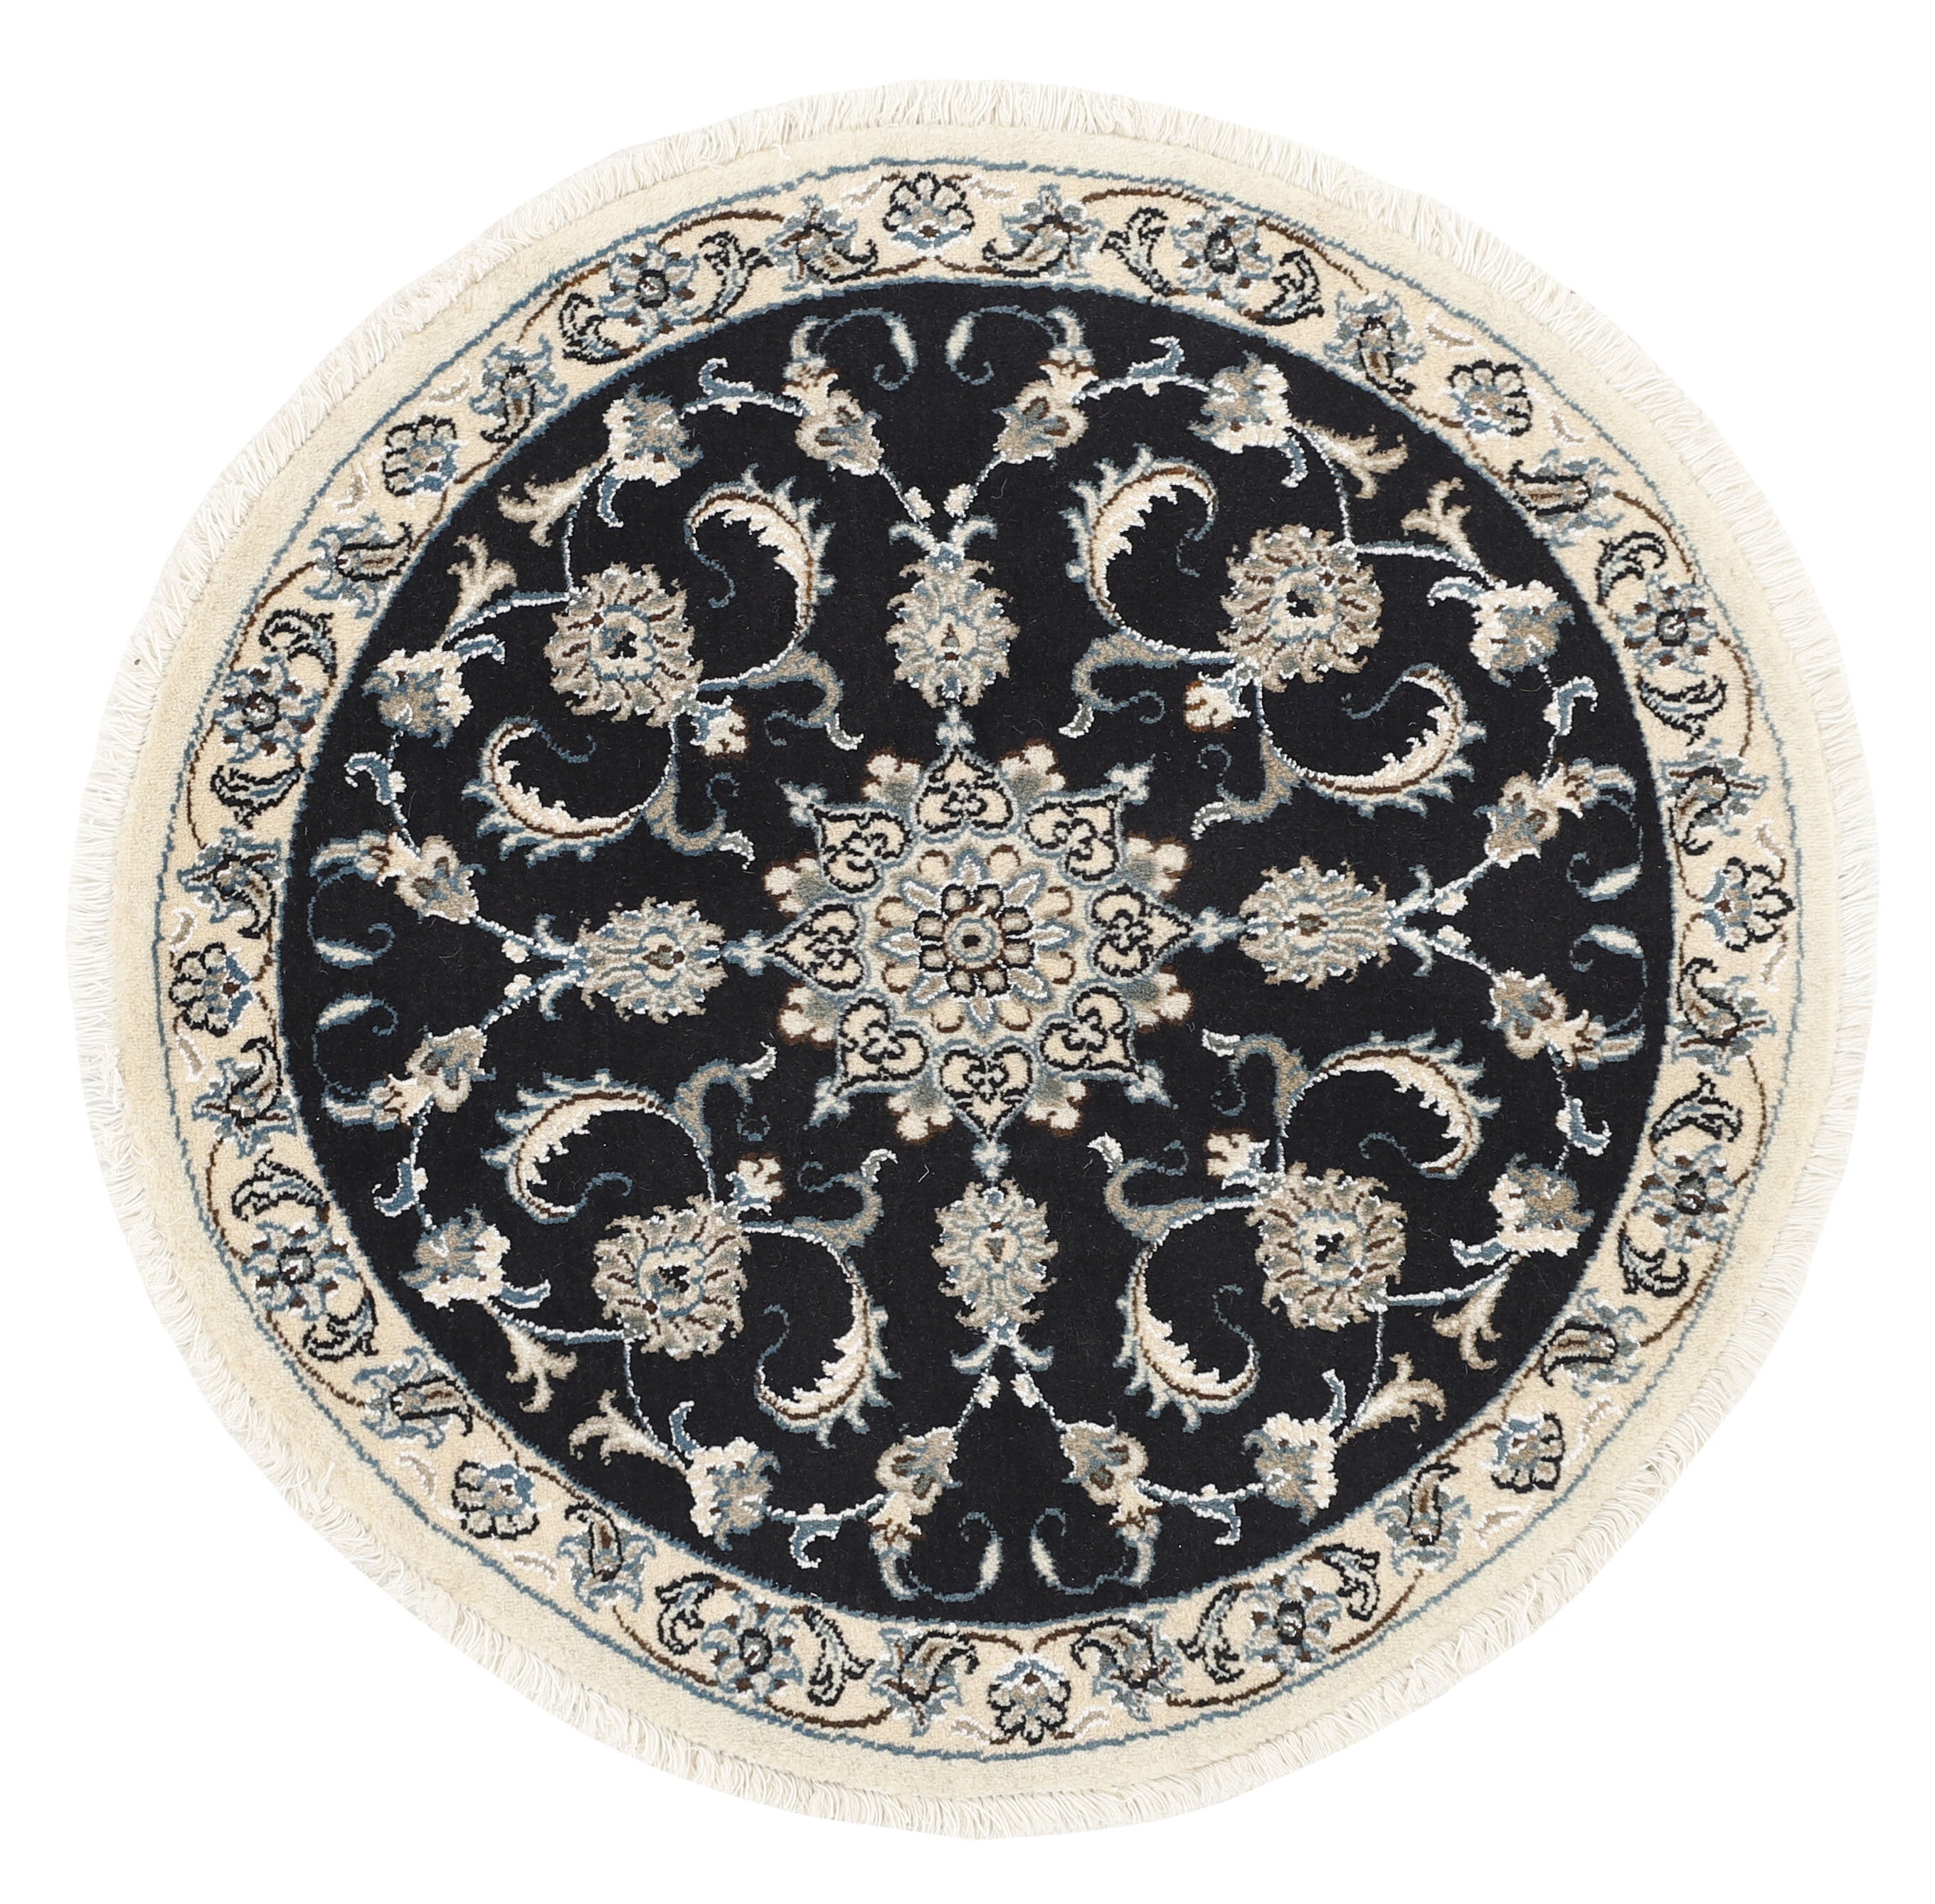 Authentic persian circle rug with a traditional floral design in cream and black